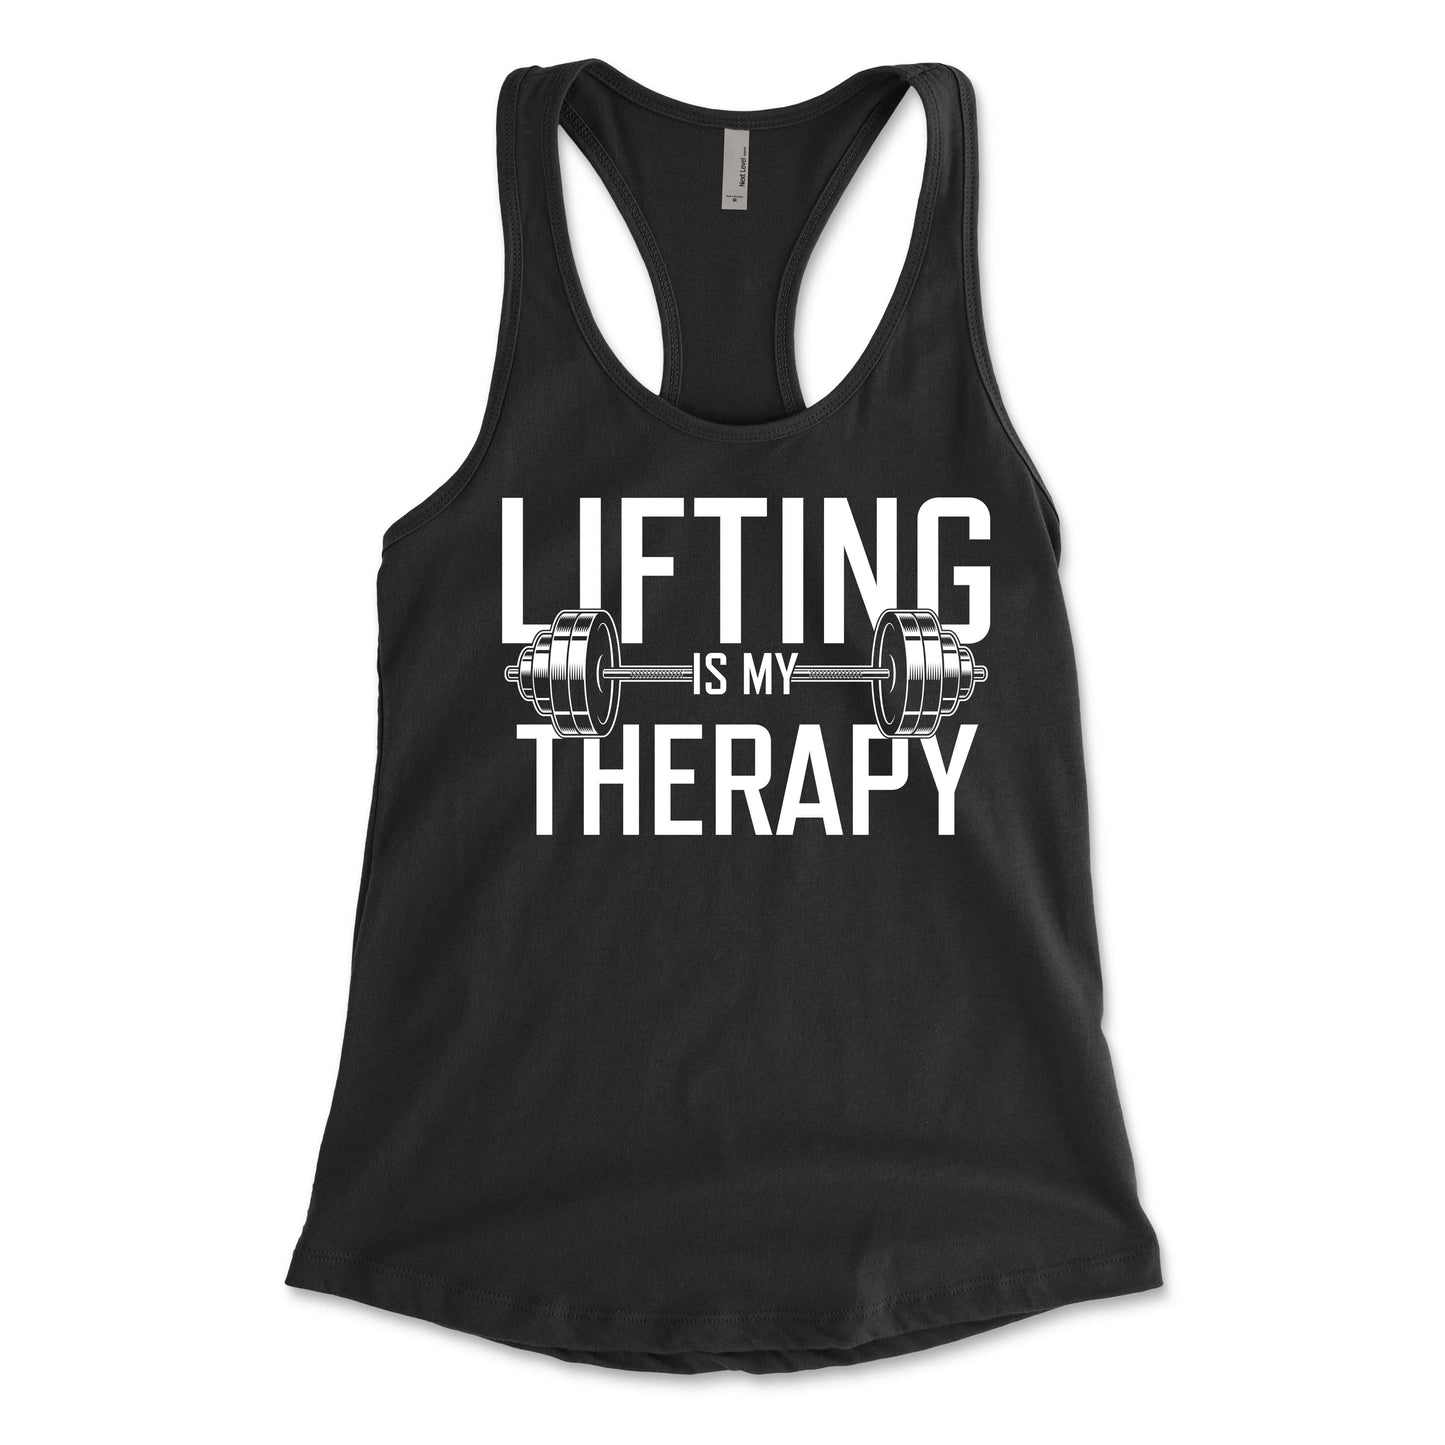 Lifting Is My Therapy Women's Racerback